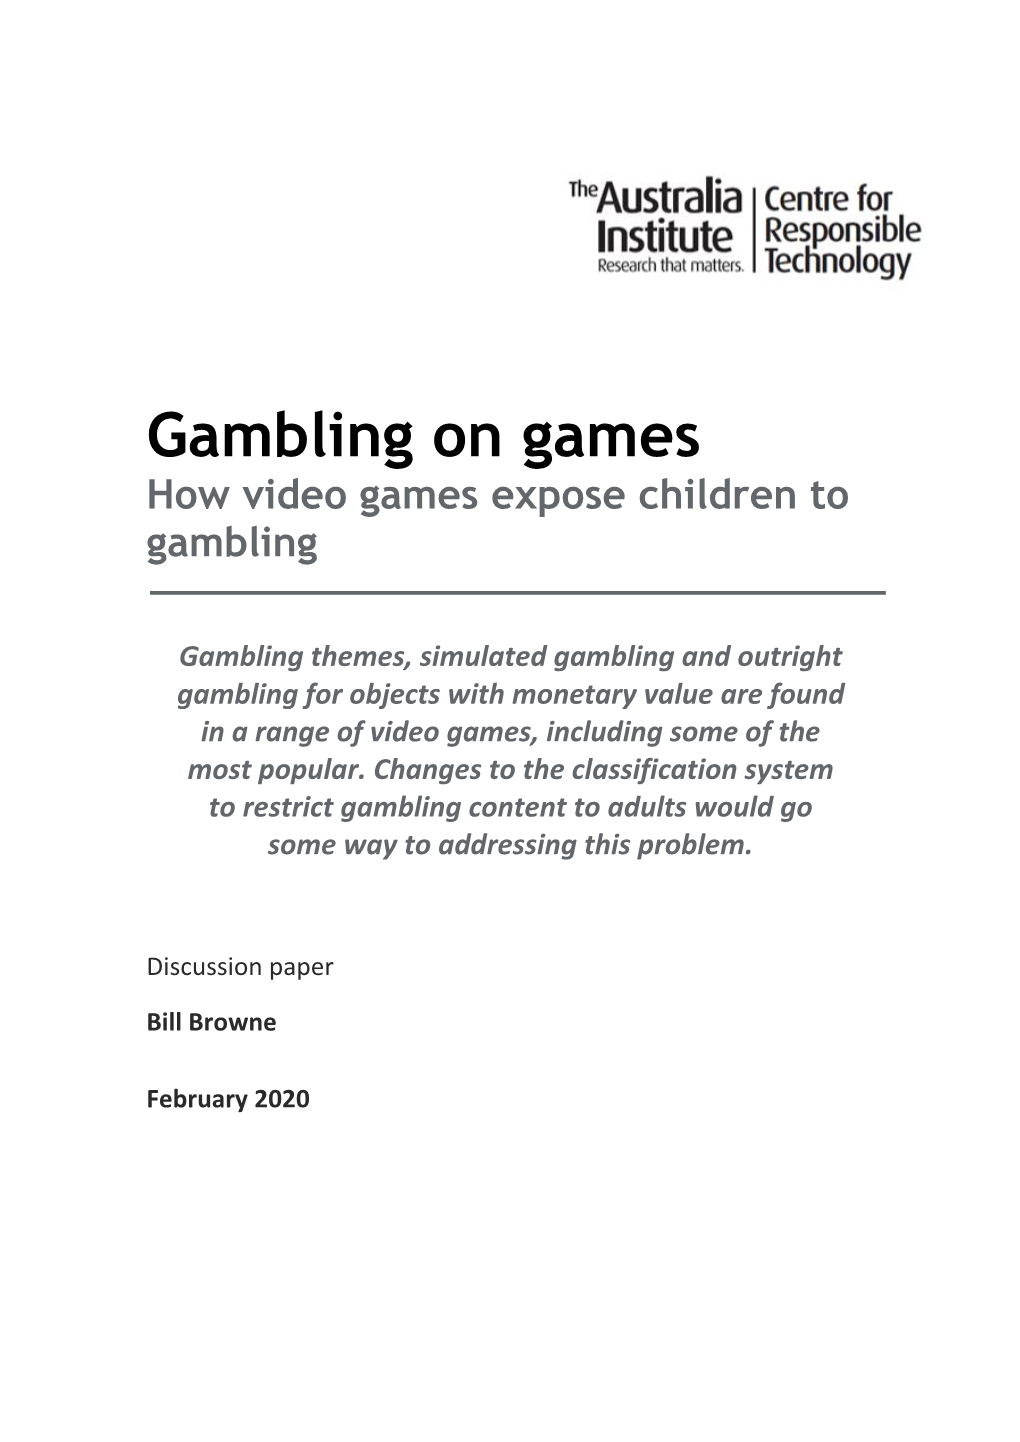 How Video Games Expose Children to Gambling